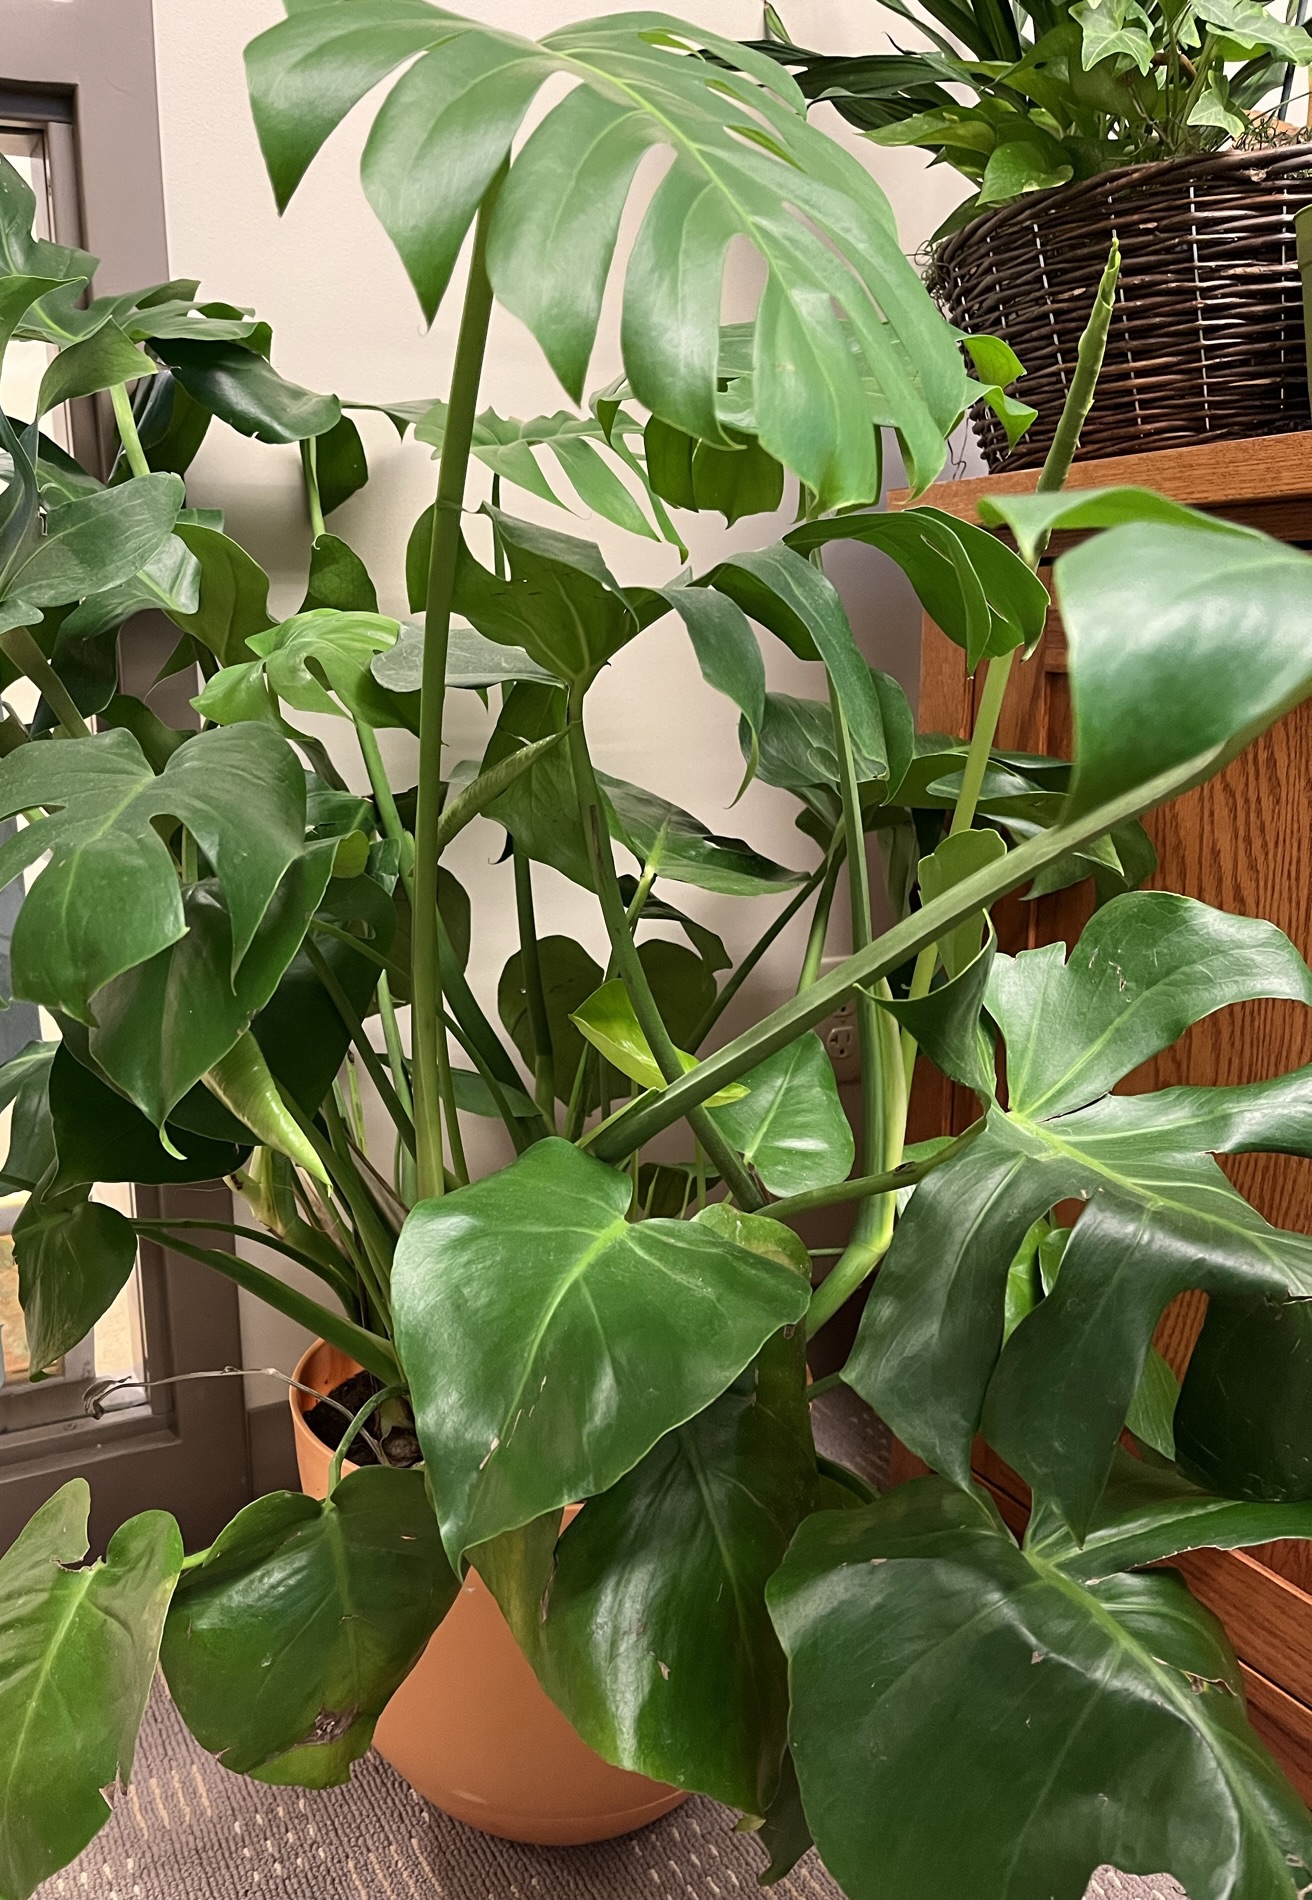 With the right care, a monstera plant can be a fun indoor addition for houseplant enthusiasts. (NDSU photo)